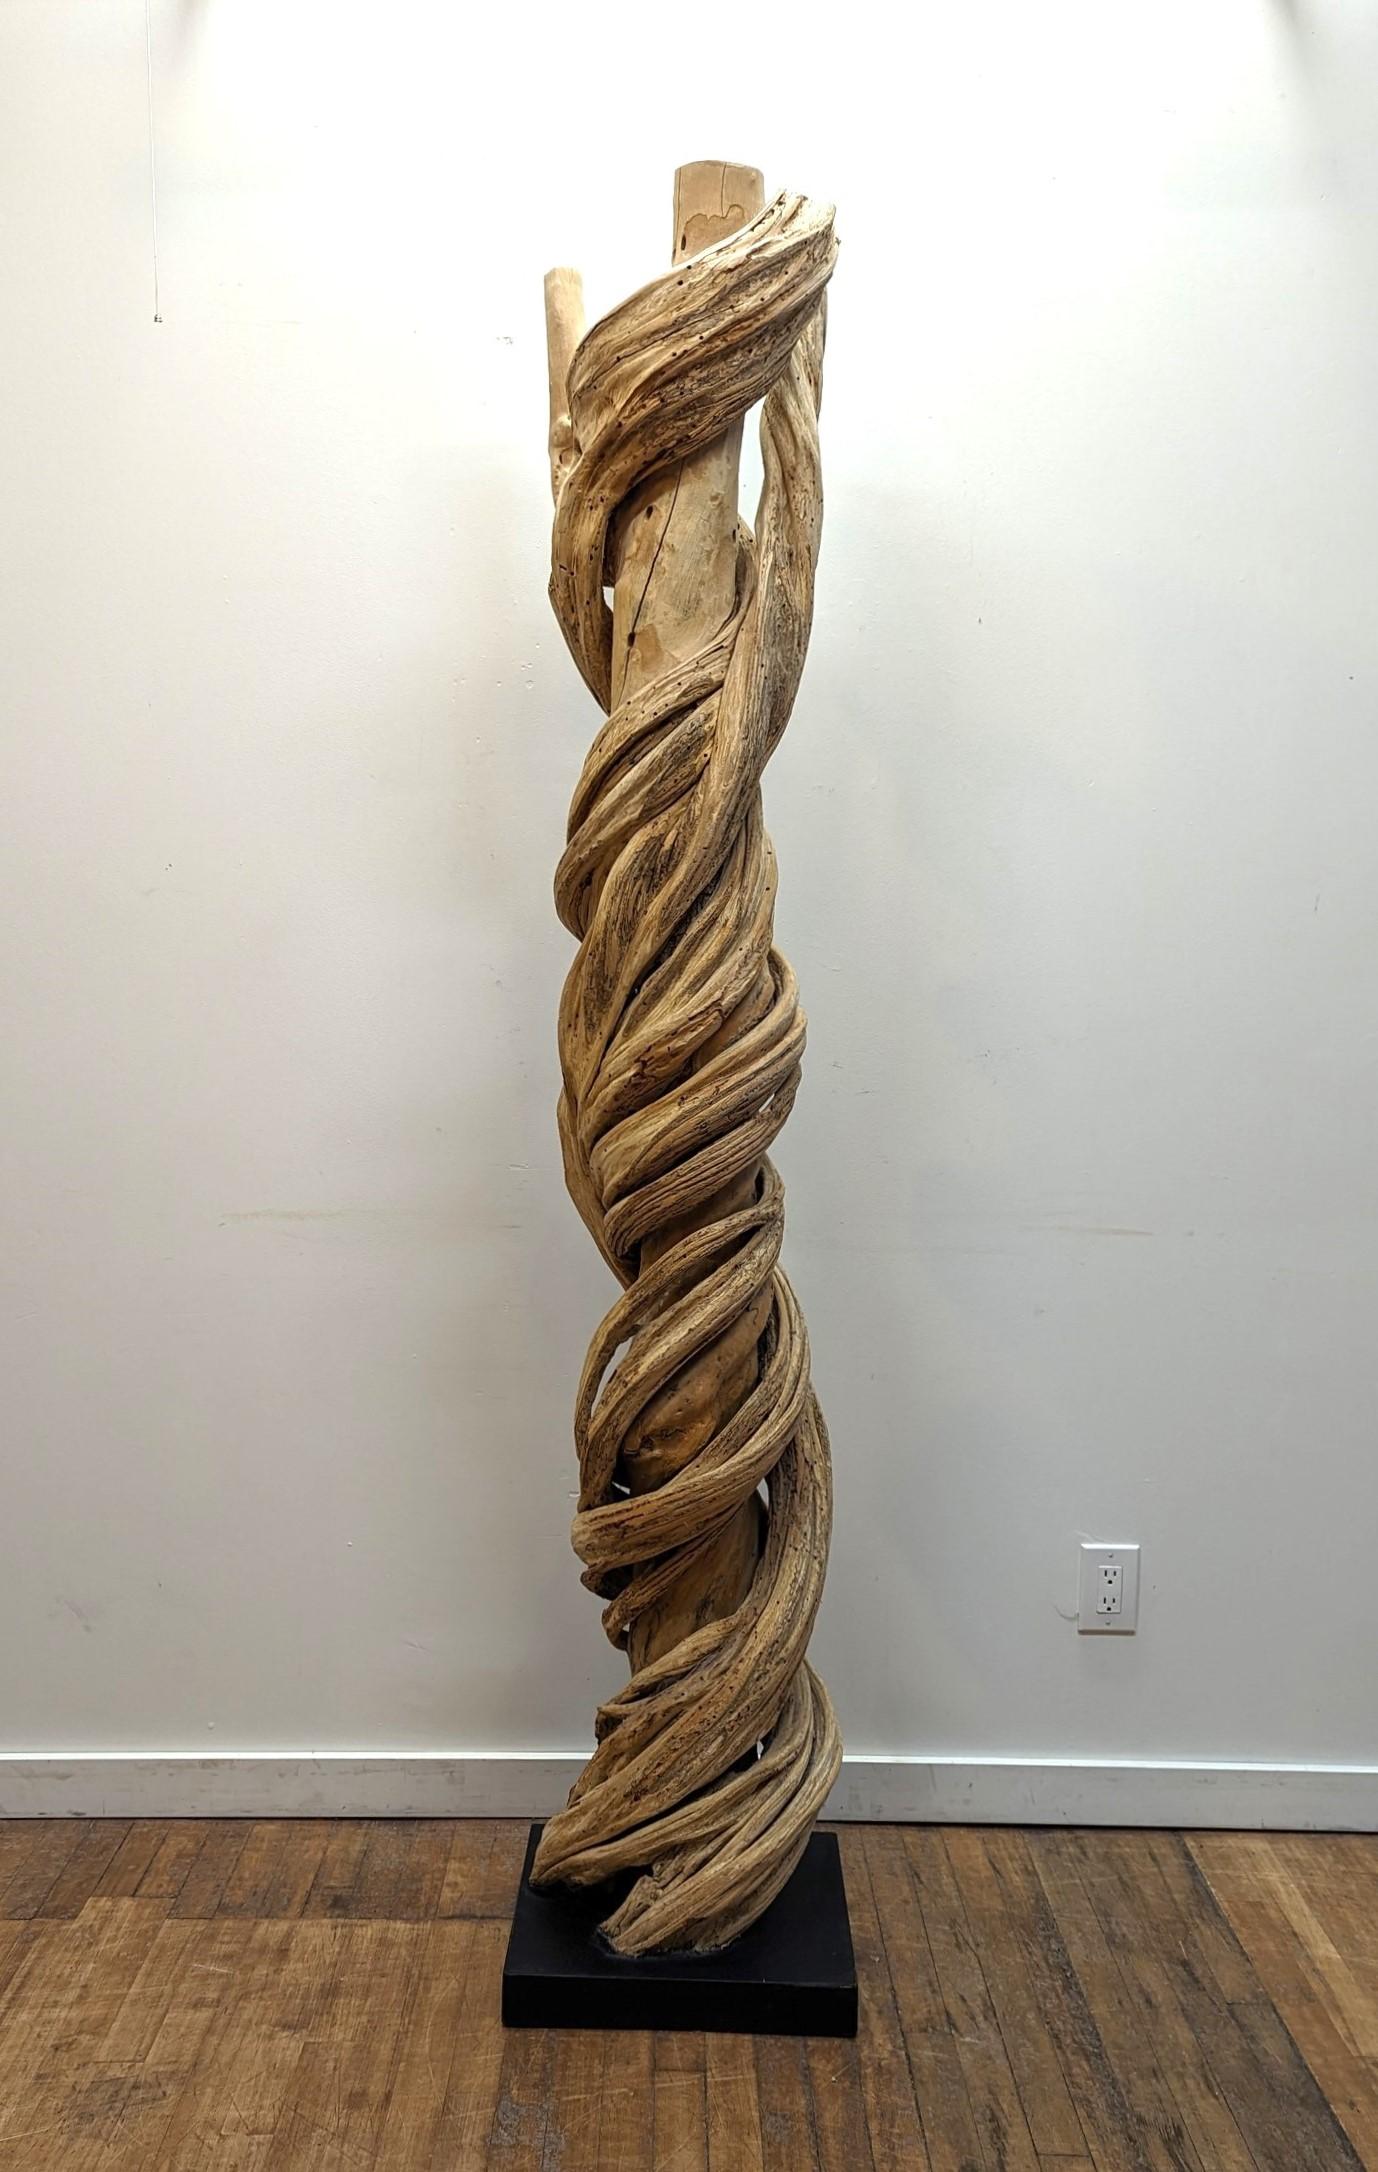 Beautiful natural Liana vine sculpture surrounding Acacia tree.  Organic   naturally occurring Liana vine growth coiled around an Acacia tree.  Naturally weathered recovered from fallen trees in Rainforest of  Northen Thailand.  Cleaned, cured